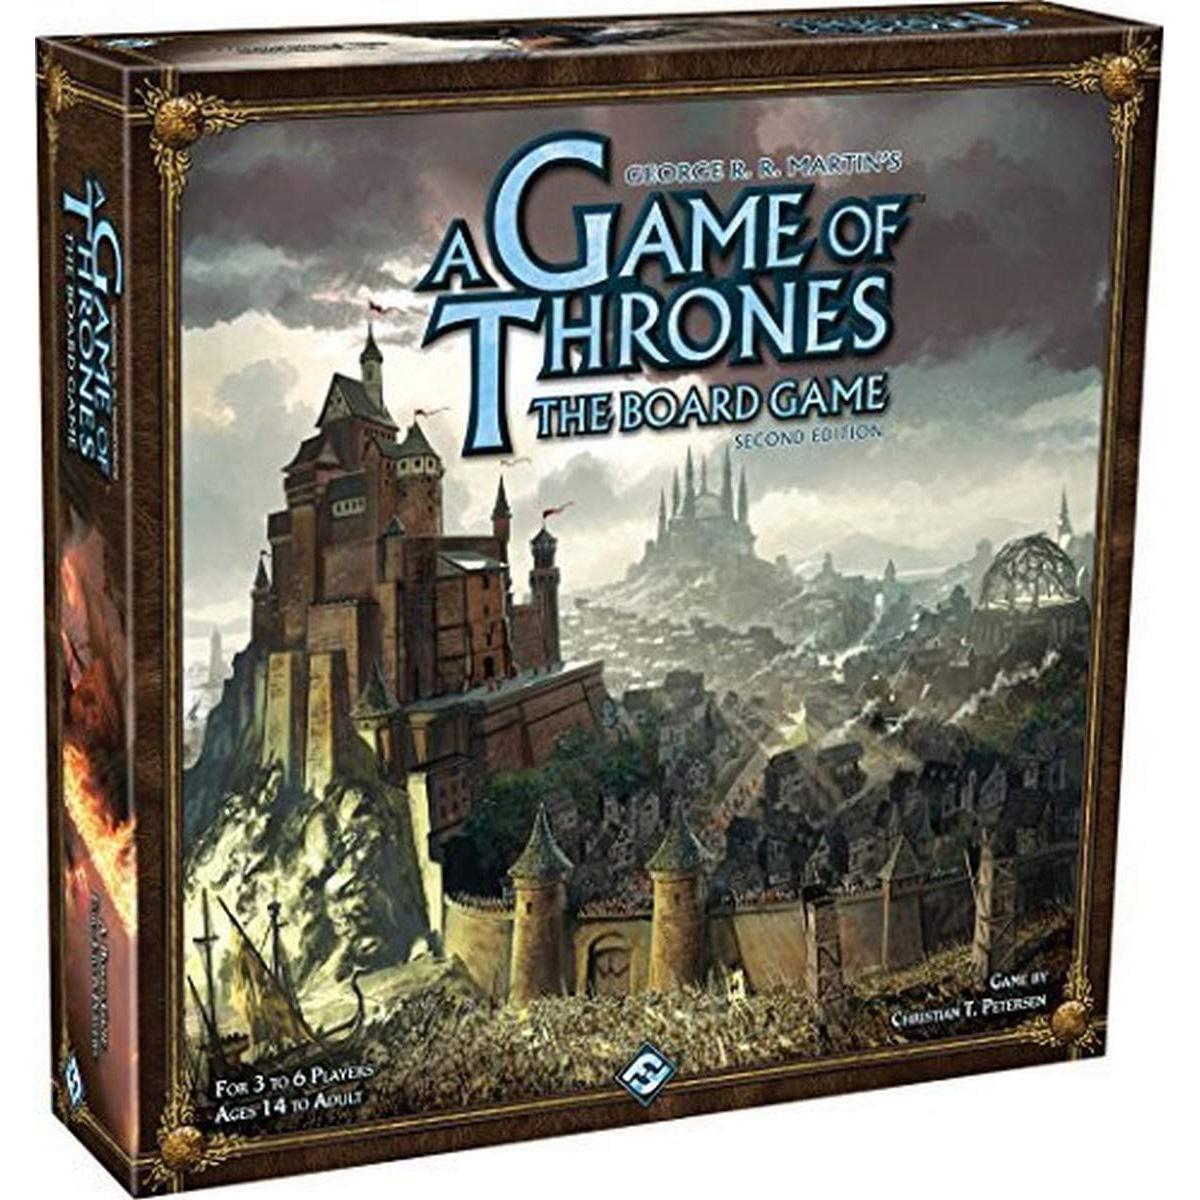 A Game Of Thrones The Board Game Digital Edition for Free